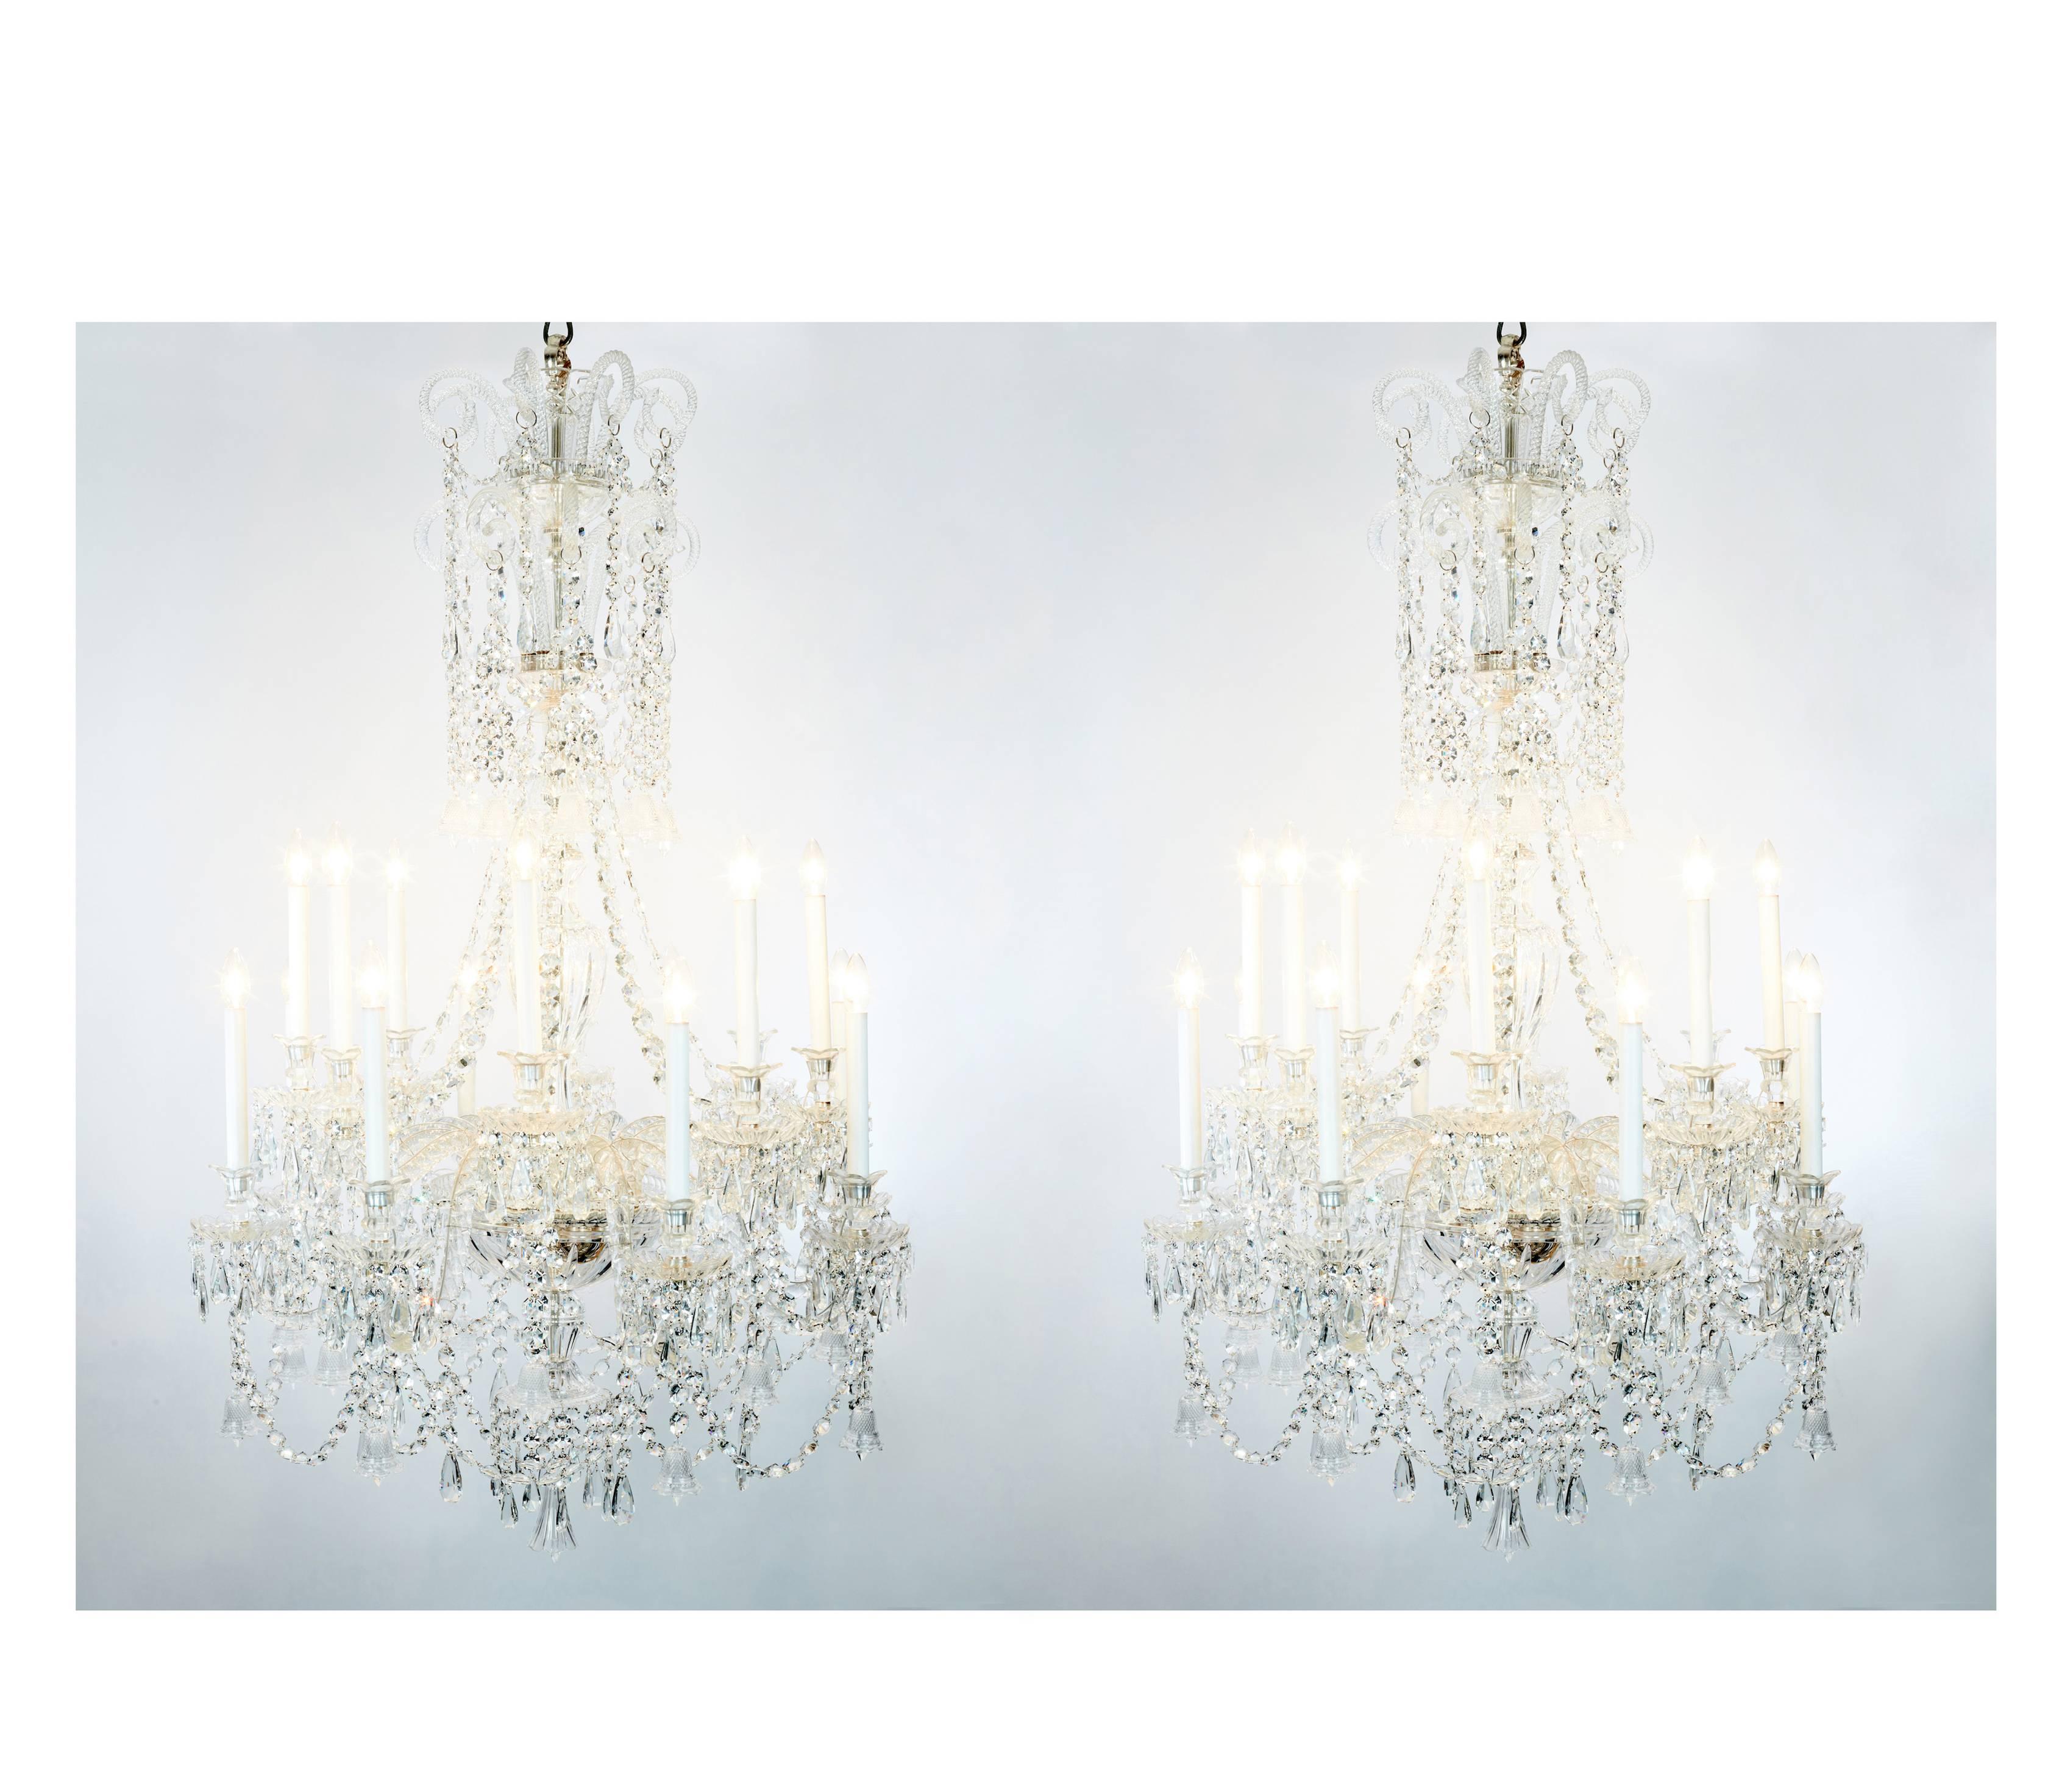 Pair of Exquisite Baccarat Crystal Chandeliers, 2